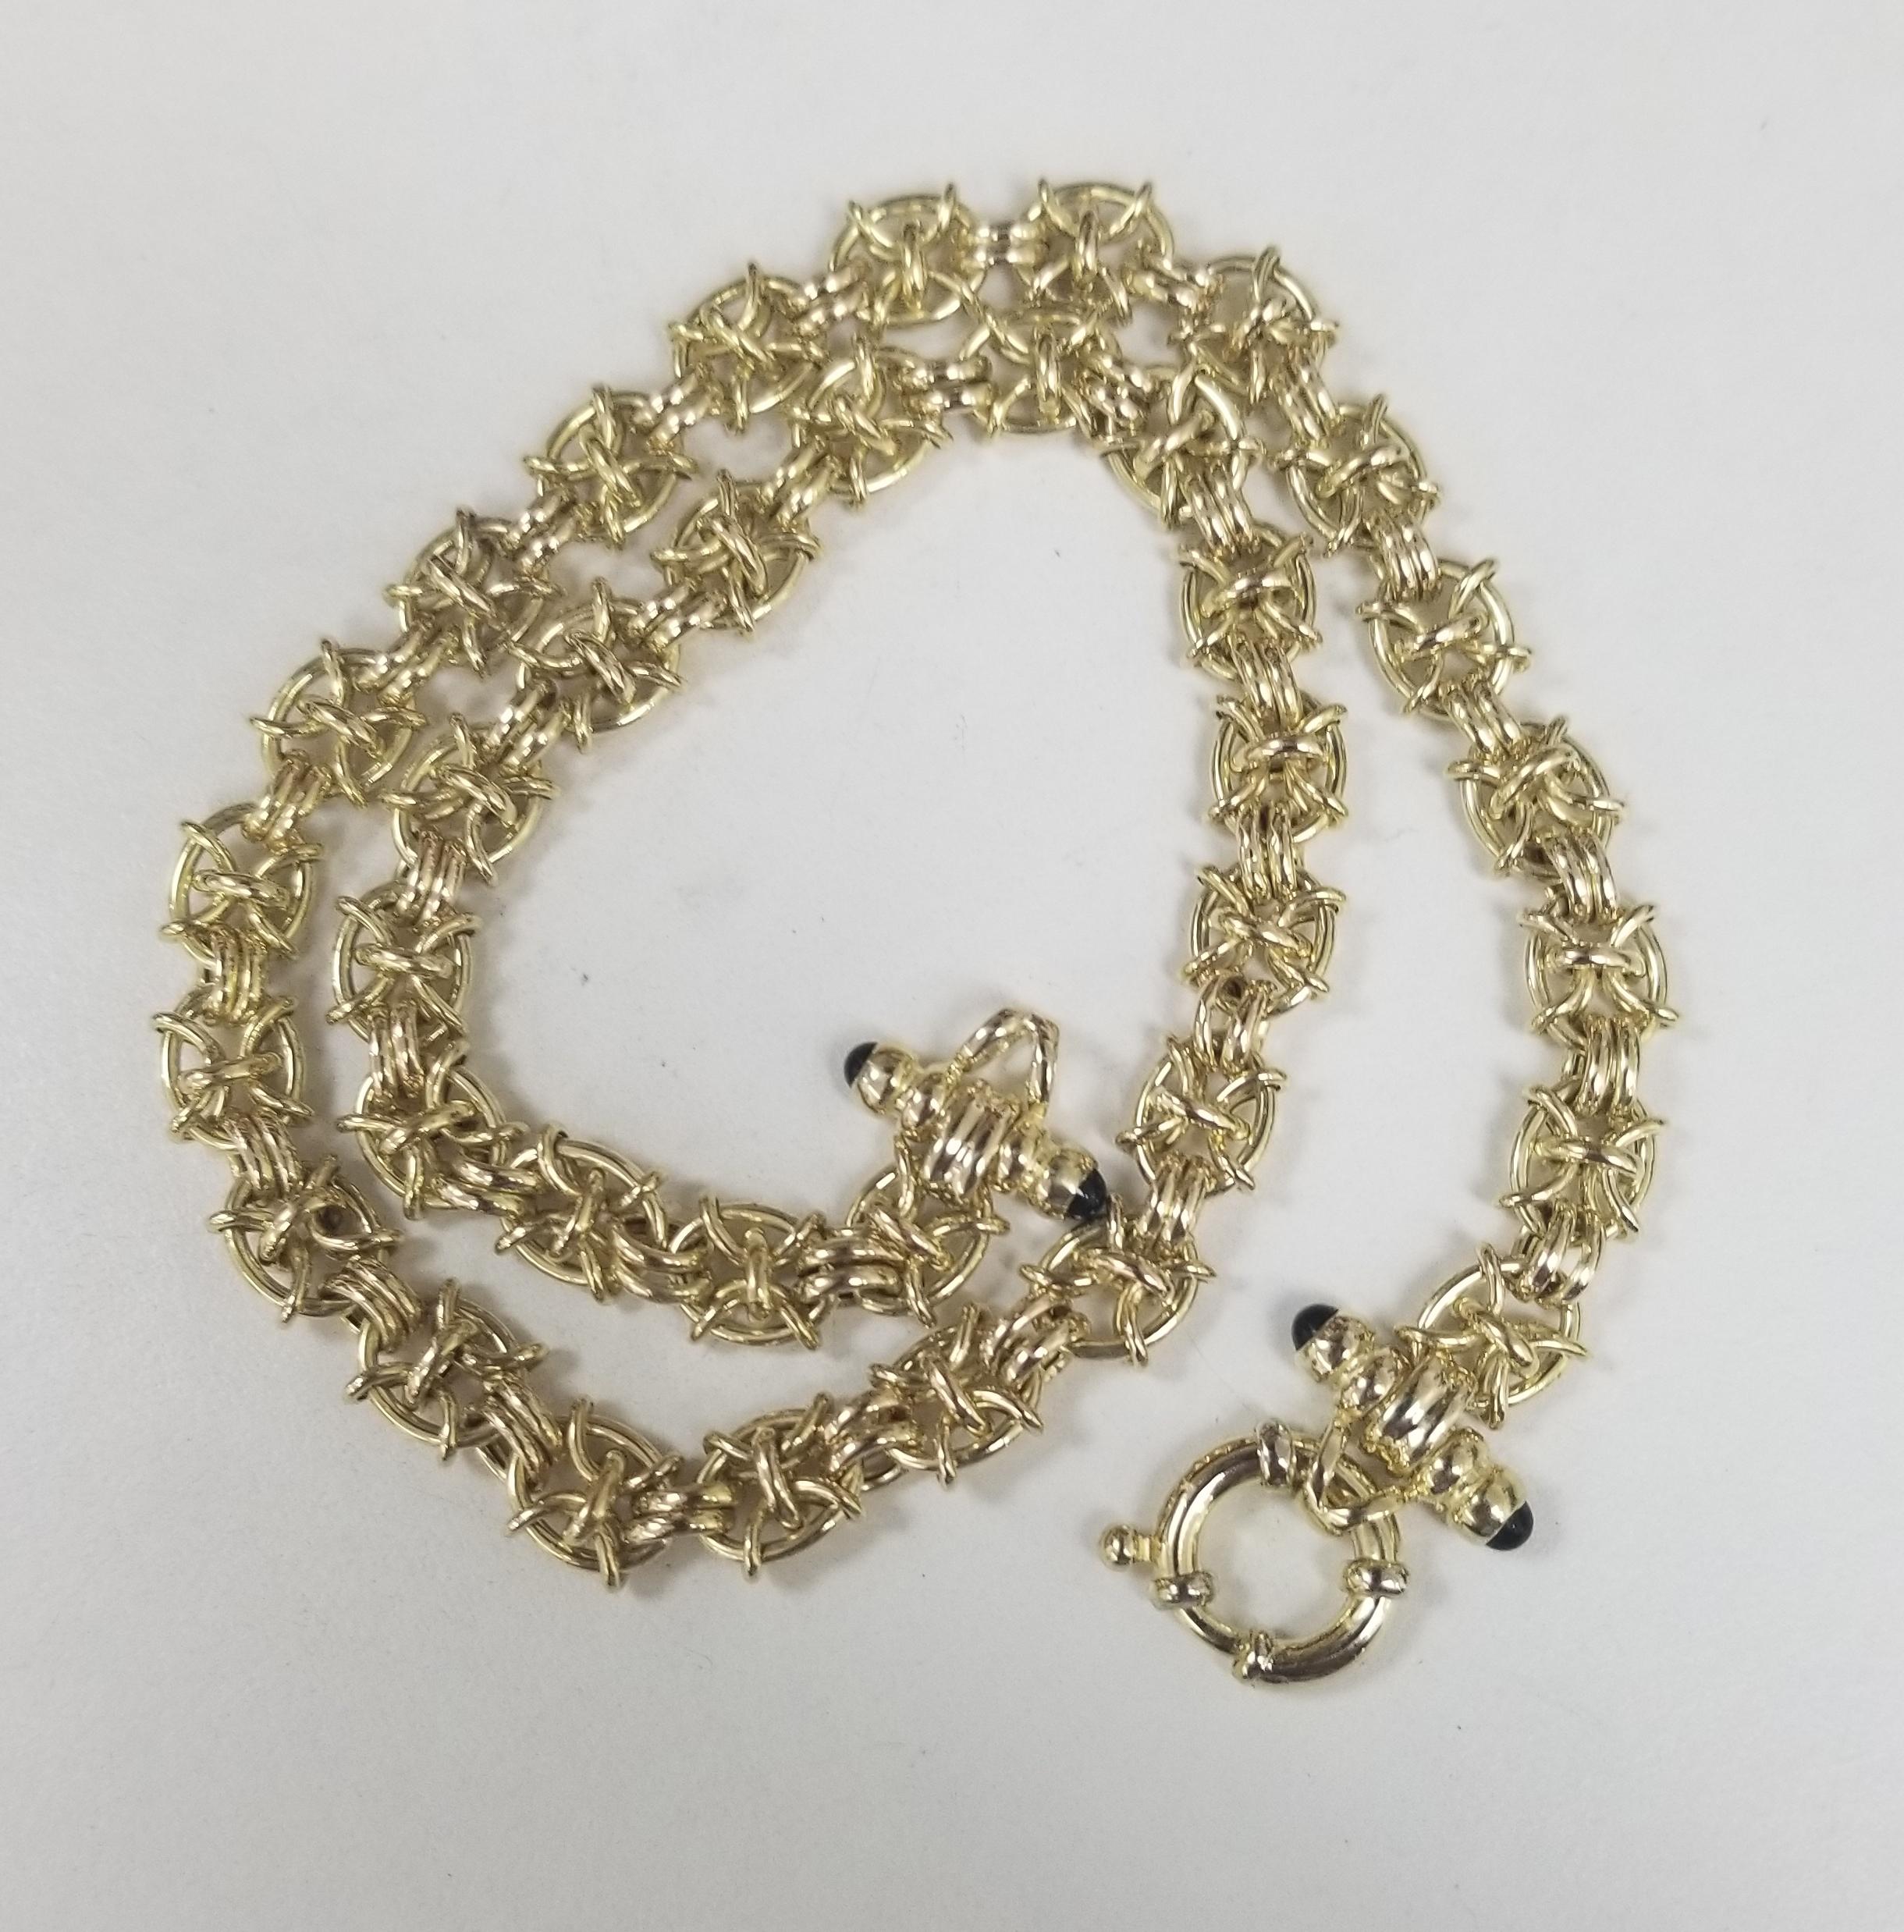 14k yellow gold hollow fancy anchor necklace with sapphire 4 cabochons at the ends of the clasp.  the necklace is 8.5mm wide and 17.5 inch long with a large clasp. the necklace weighs 23.20 grams.